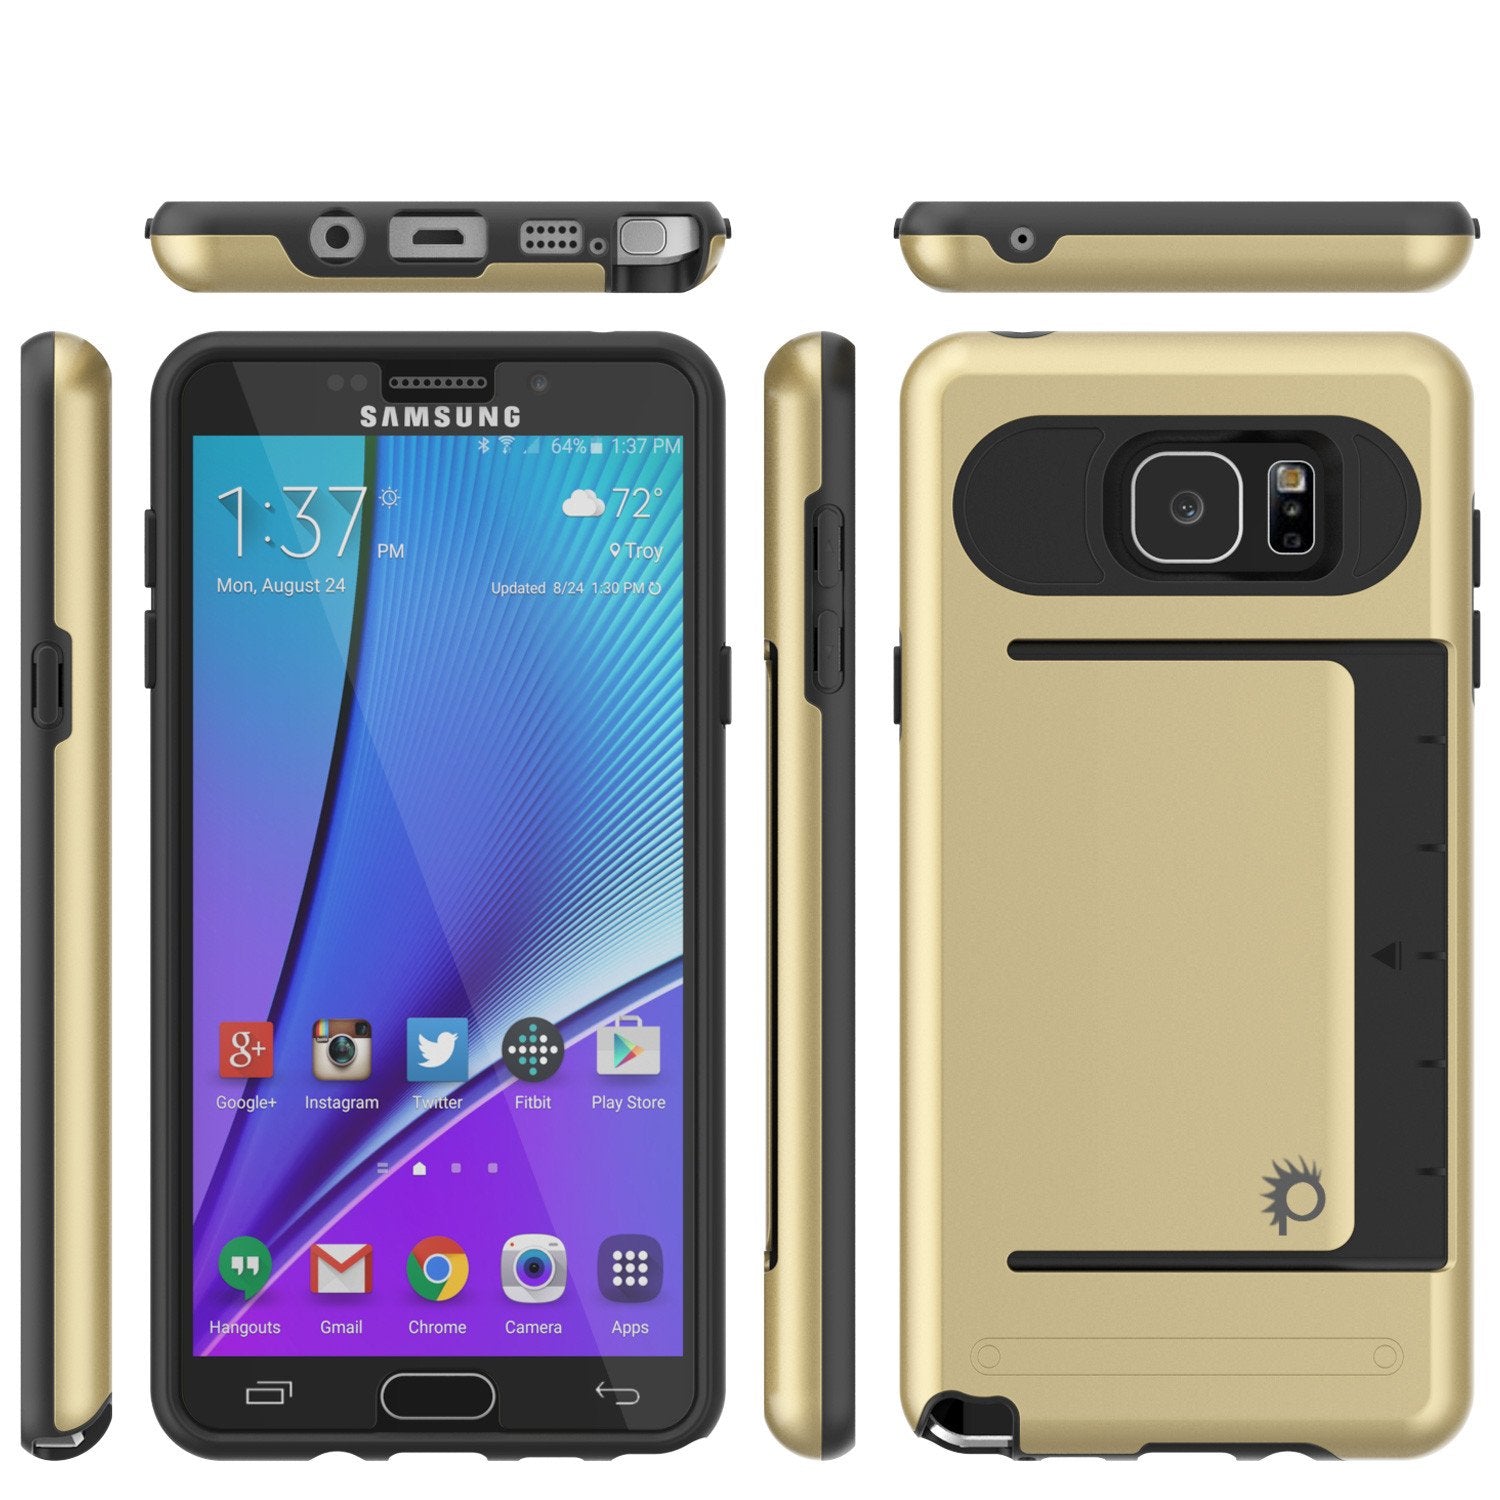 Galaxy Note 5 Case PunkCase CLUTCH Gold Series Slim Armor Soft Cover Case w/ Tempered Glass - PunkCase NZ